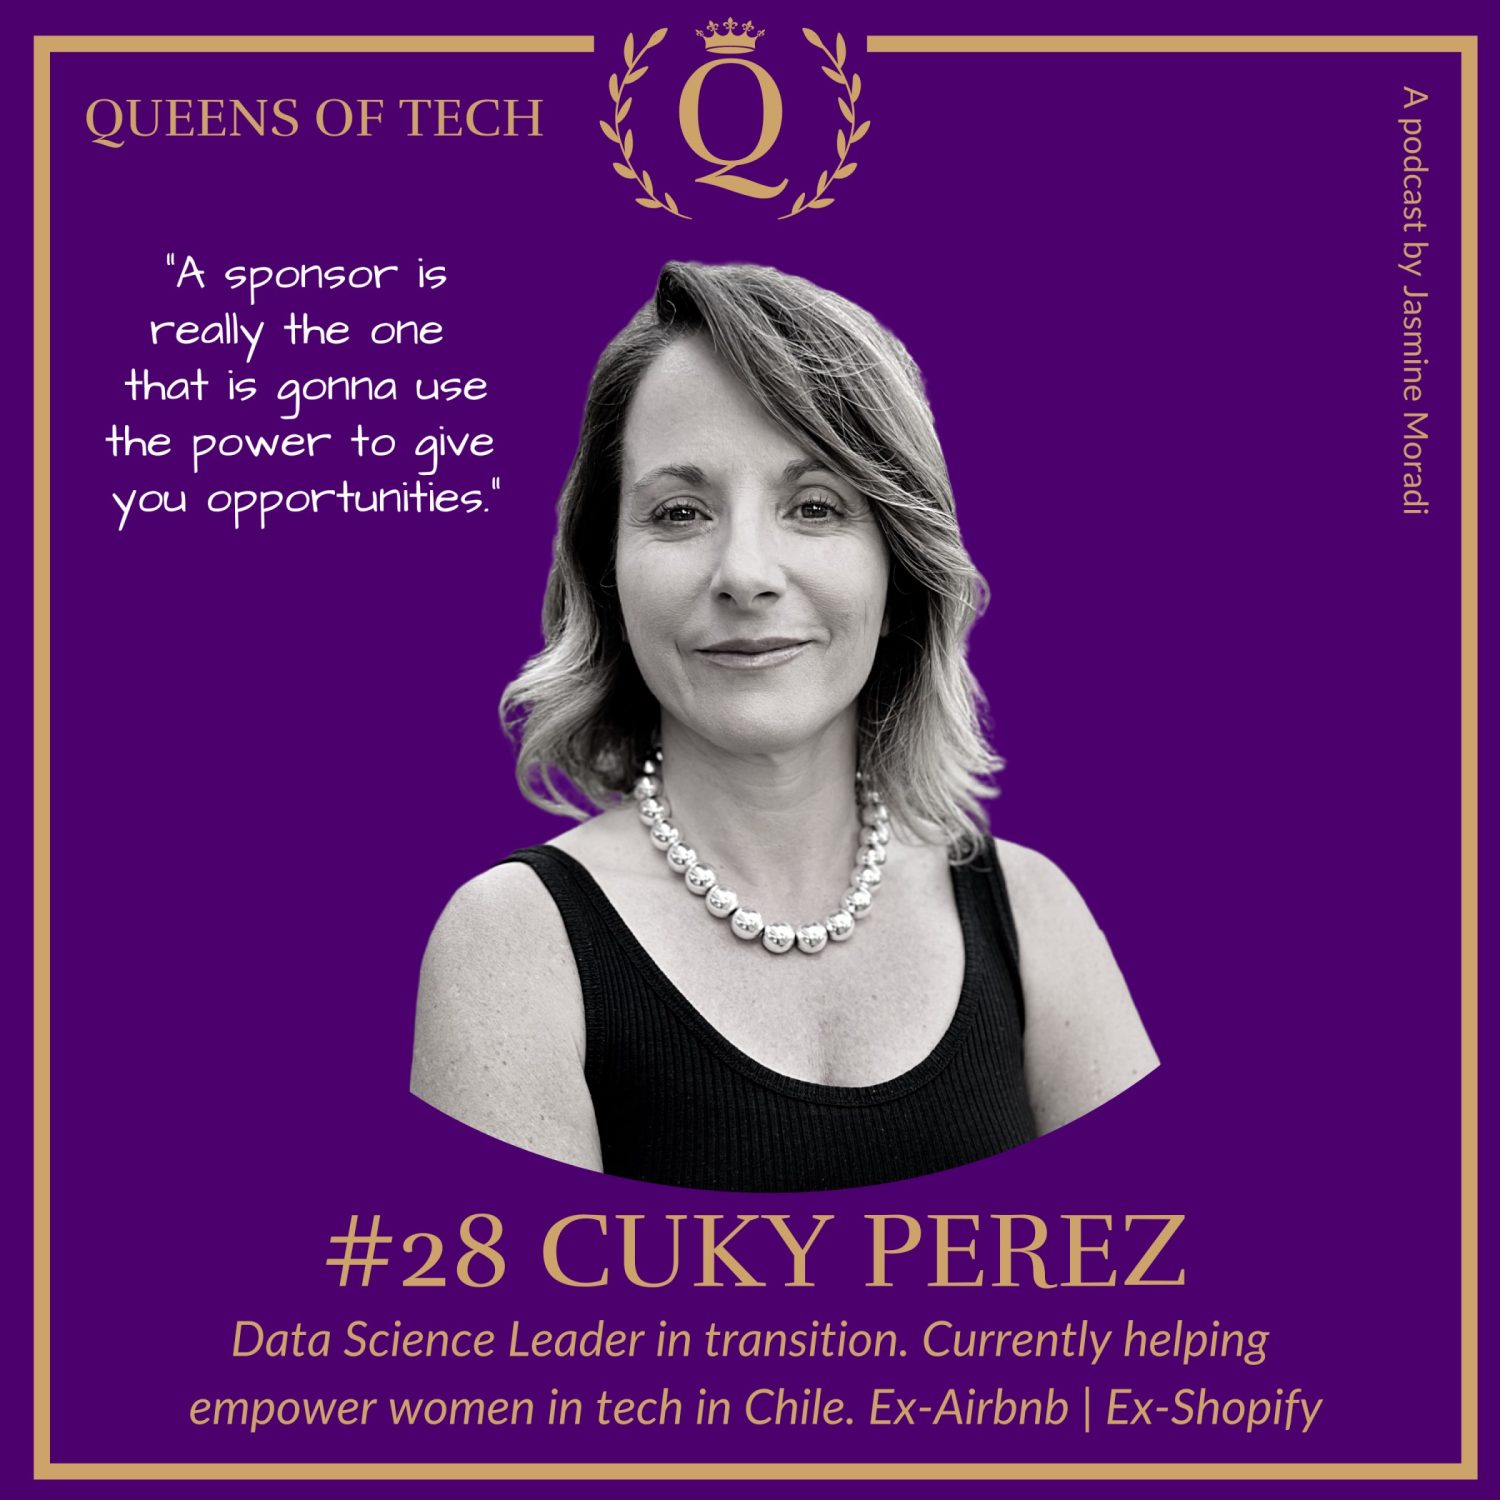 Queens of Tech-Cuky Perez - Data Science Leader in transition | Currently helping empower women in Tech in Chile | Ex-Airbnb | Ex-Shopify